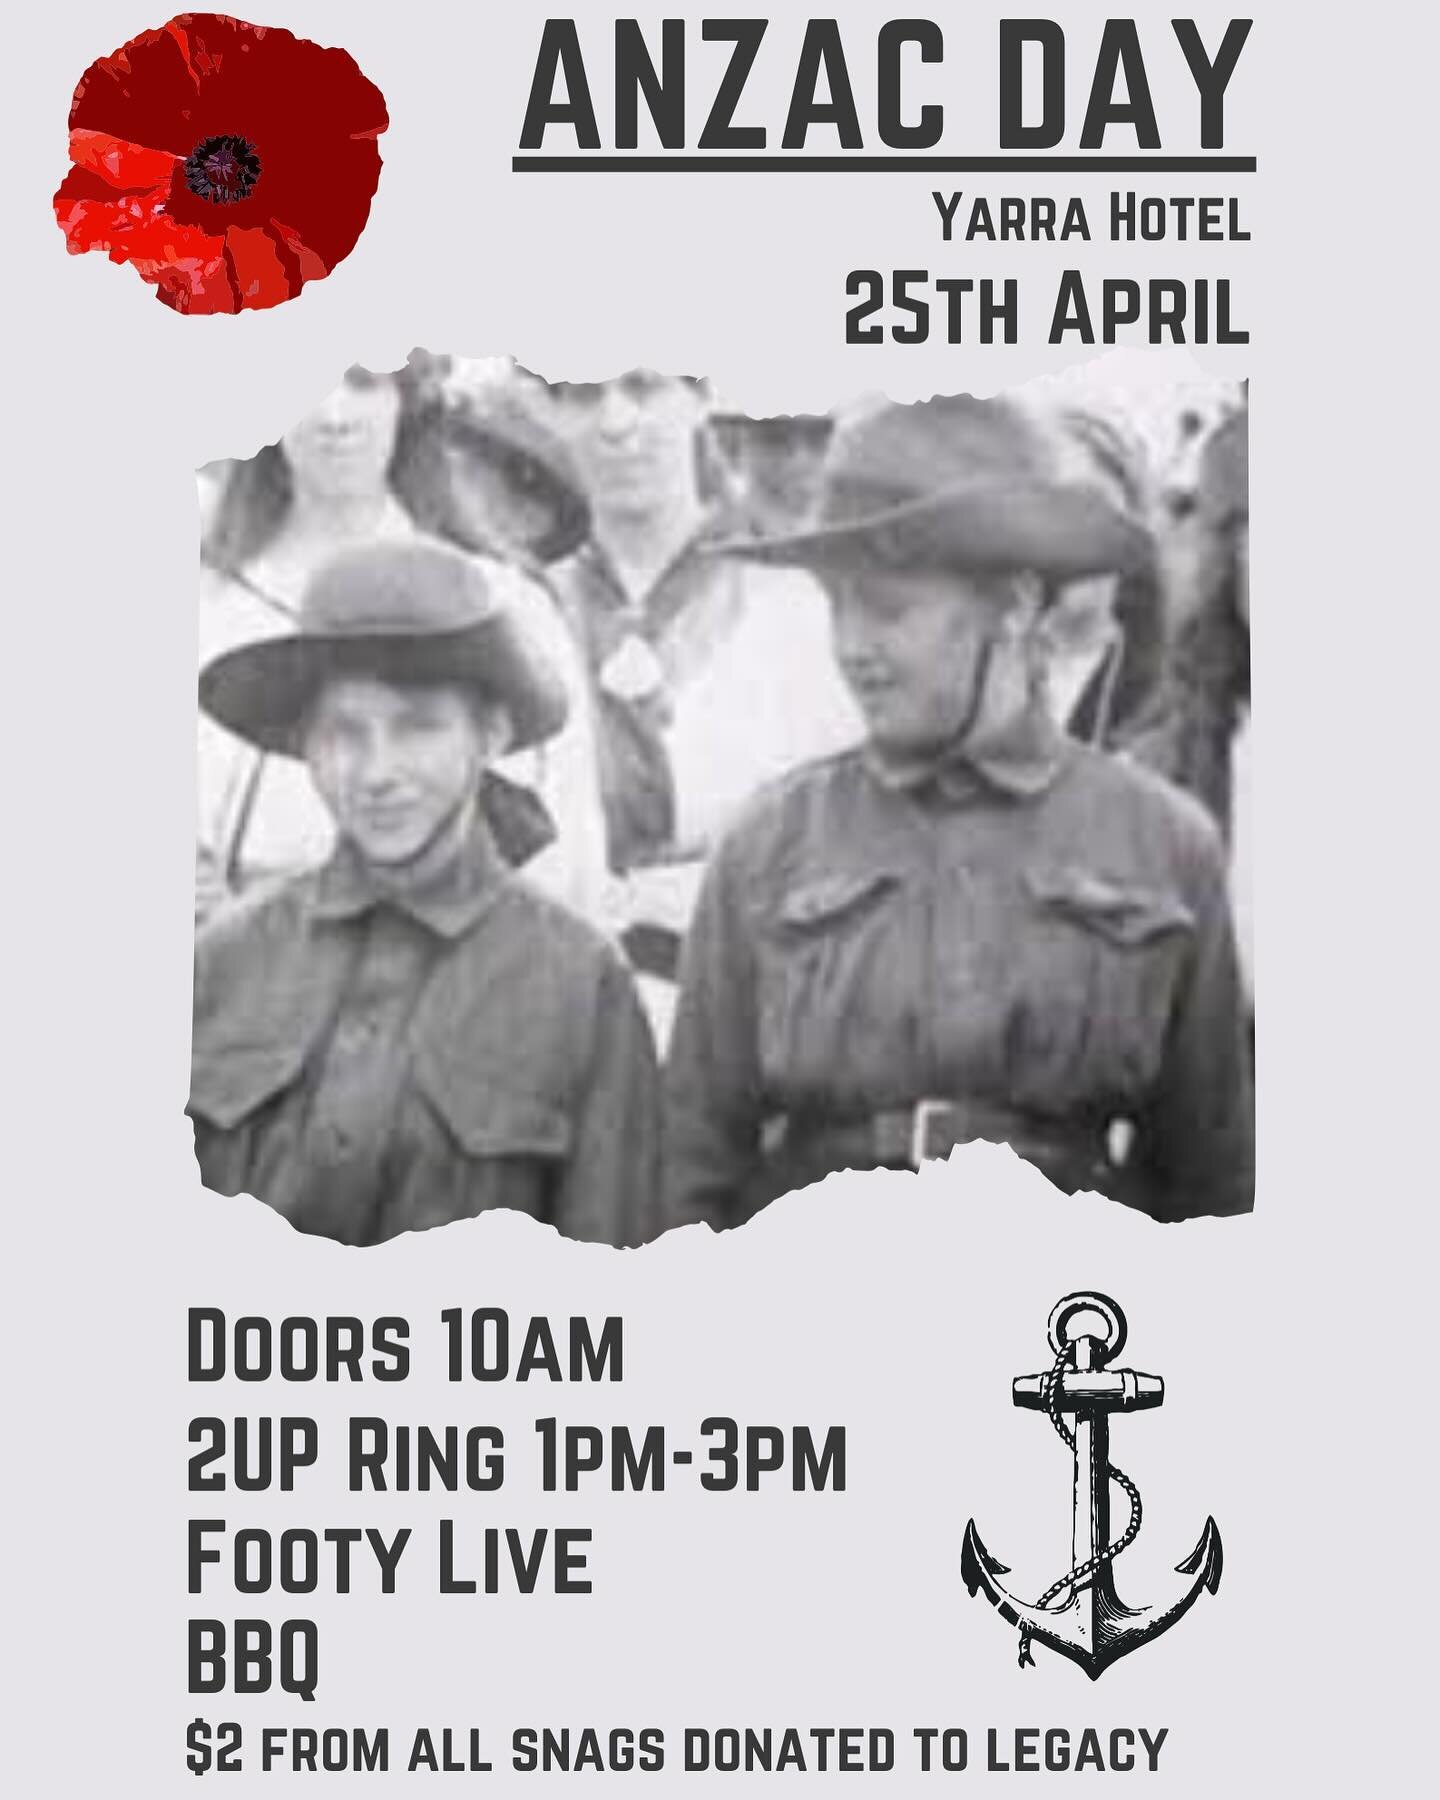 A day to remember&hellip; Lest we forget. 
We&rsquo;re getting ready for a big Anzac Day at the Yarra hotel and we&rsquo;d love you to join us!

- Doors at 10am
- 2UP between 1-3pm (hosted by our good friend @aarongocs)
- Collingwood Vs Essendon live